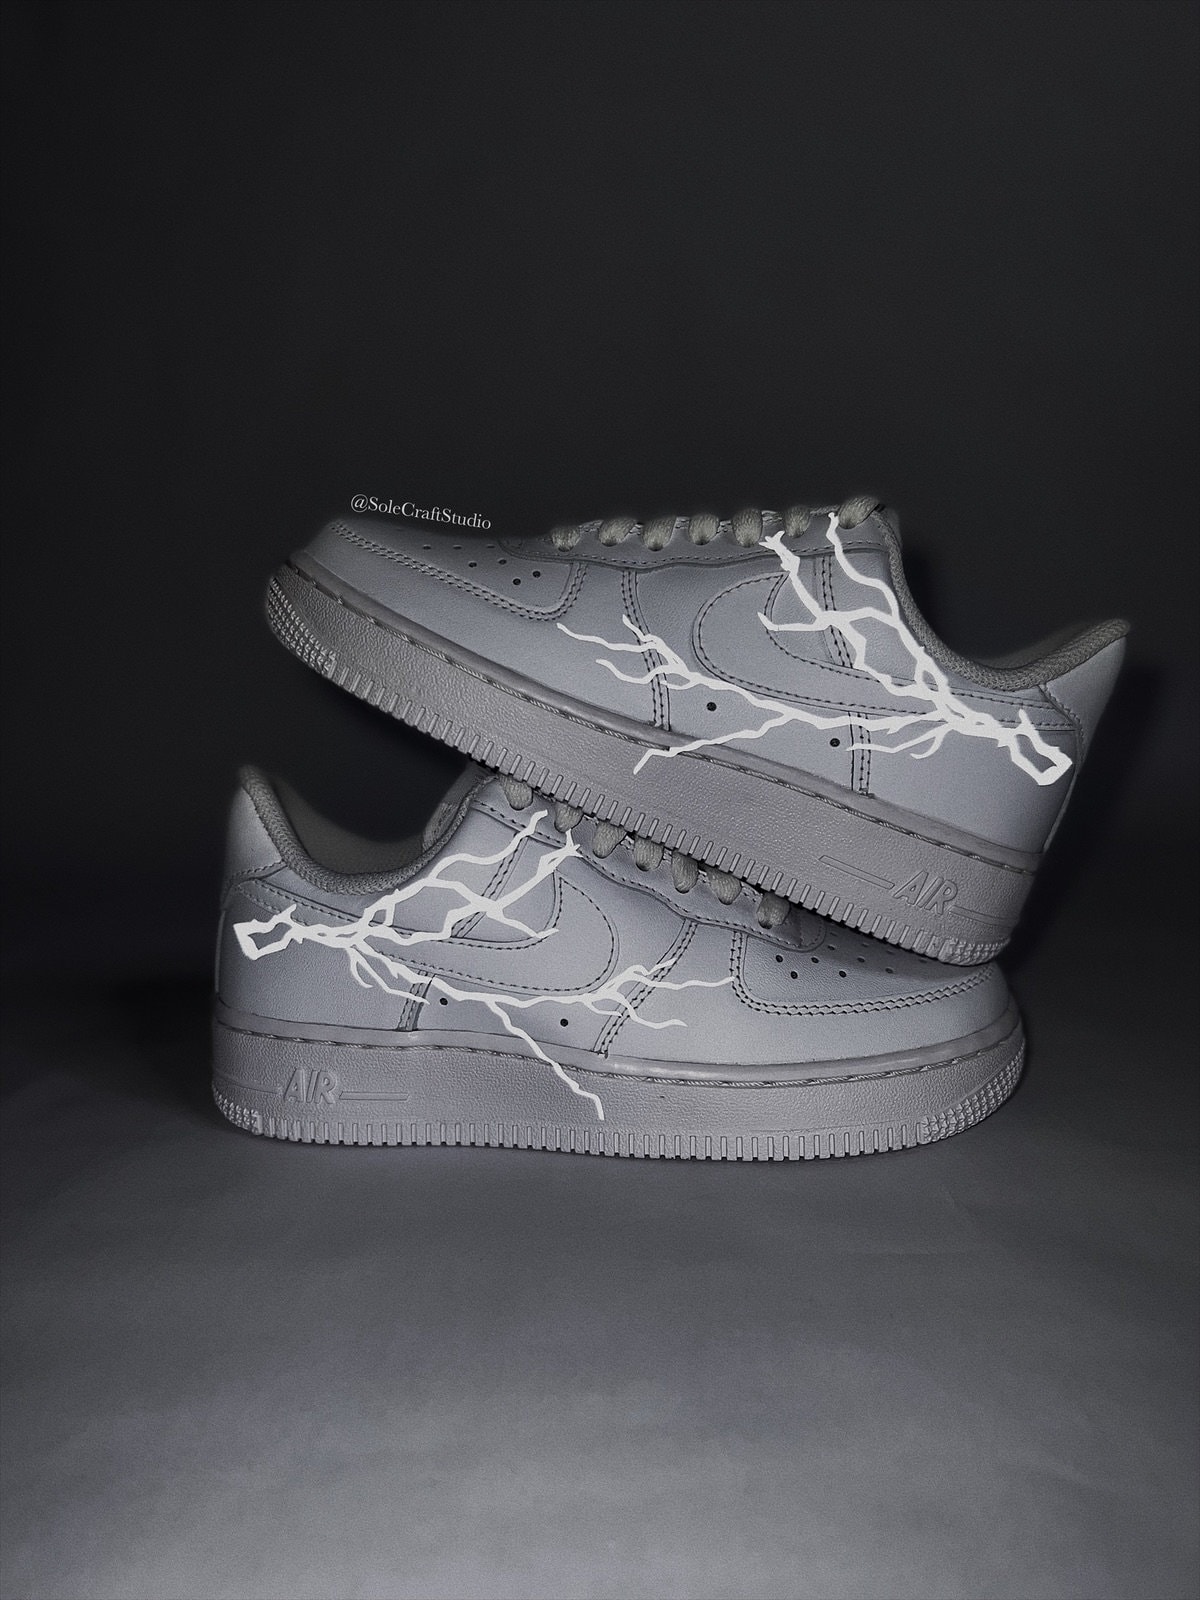 Black Dripping with Reflective Lightning Bolt Custom Air Force 1 Sneakers 10.5 M / 12 W